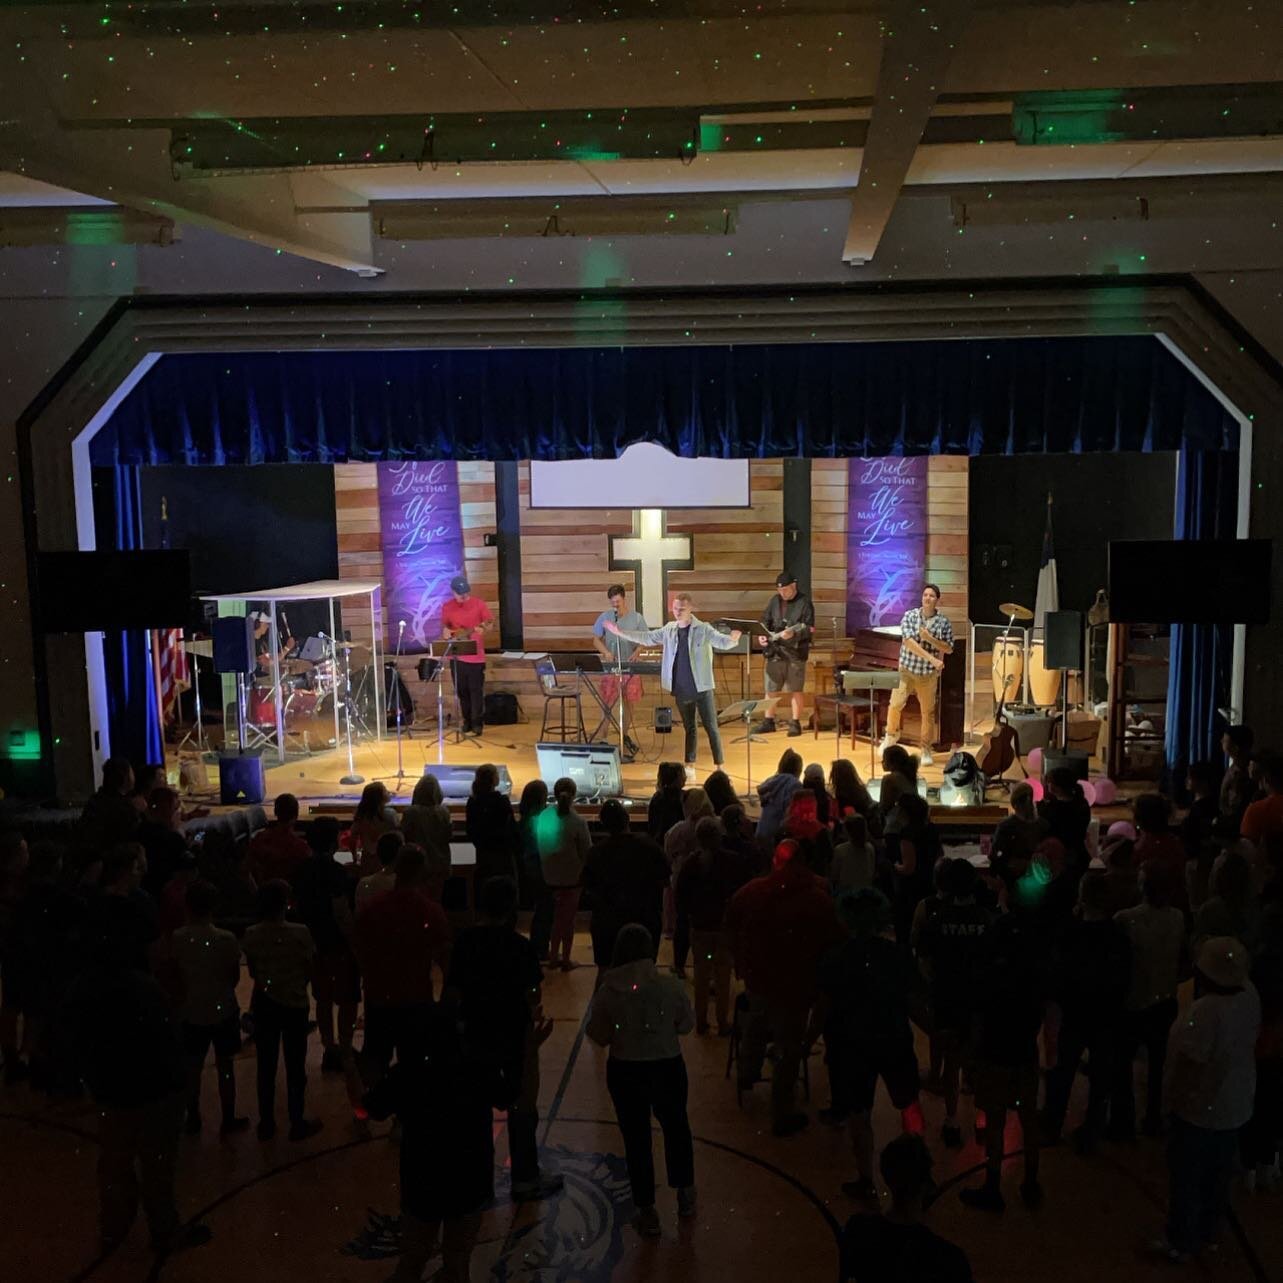 LOCK-IN 2022 WAS WYLD!!!🆒😜🦈 Over 100 teens from the region gathered for an overnighter of fun, food, games, &amp; Jesus 🙌 Special shoutout to our youth pastors @nickdipasqua and @z.achwilliams and all of our amazing volunteers that made this even